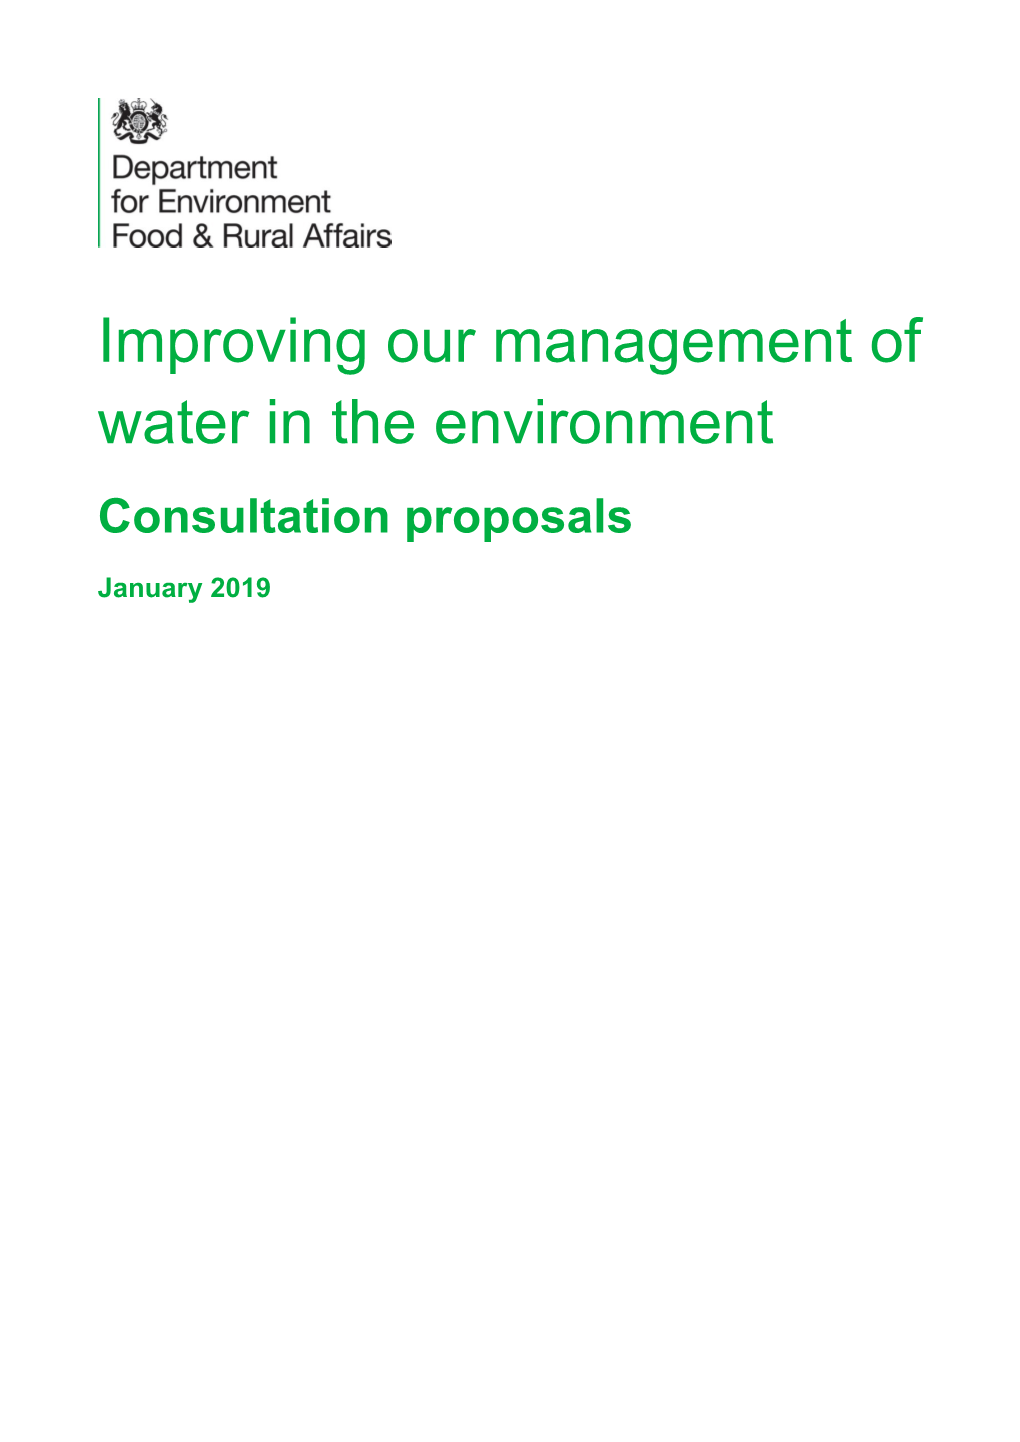 Improving Our Management of Water in the Environment Consultation Proposals